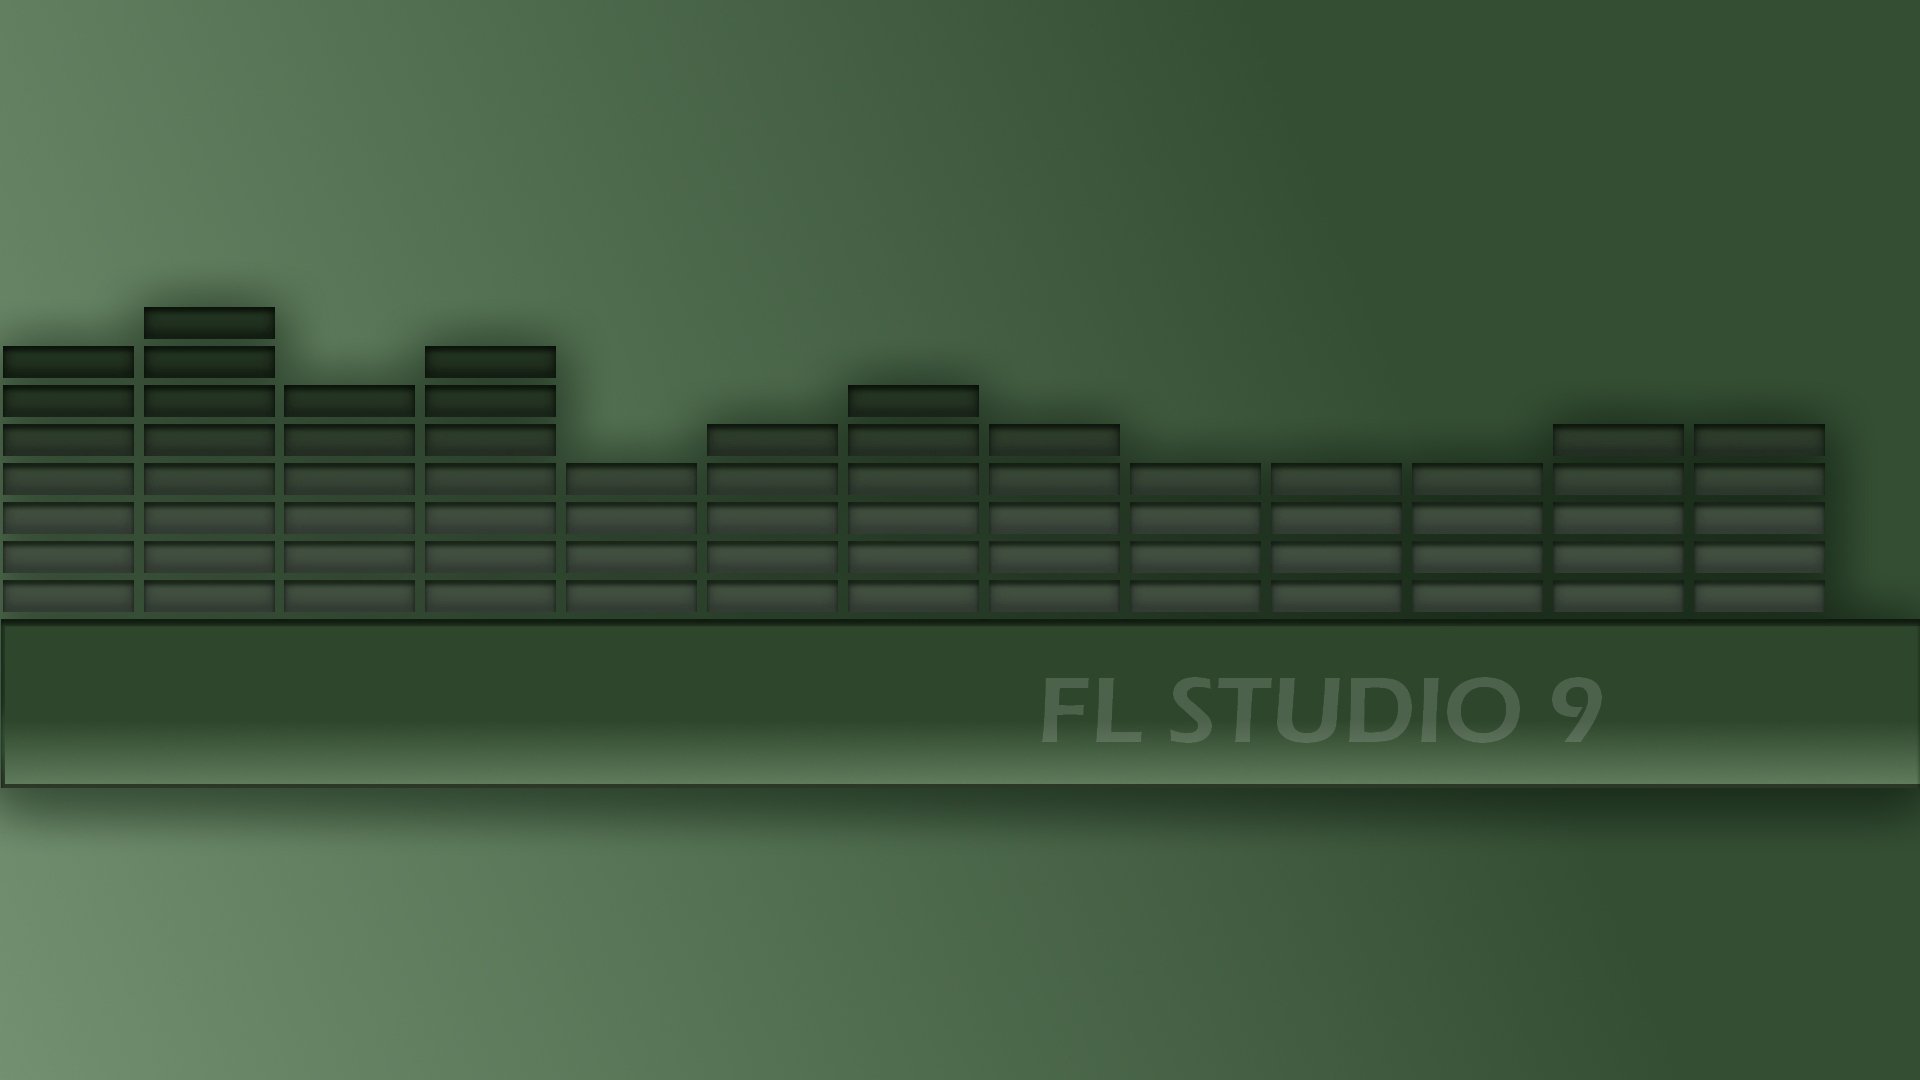 how to get fl studio 11 full version for free